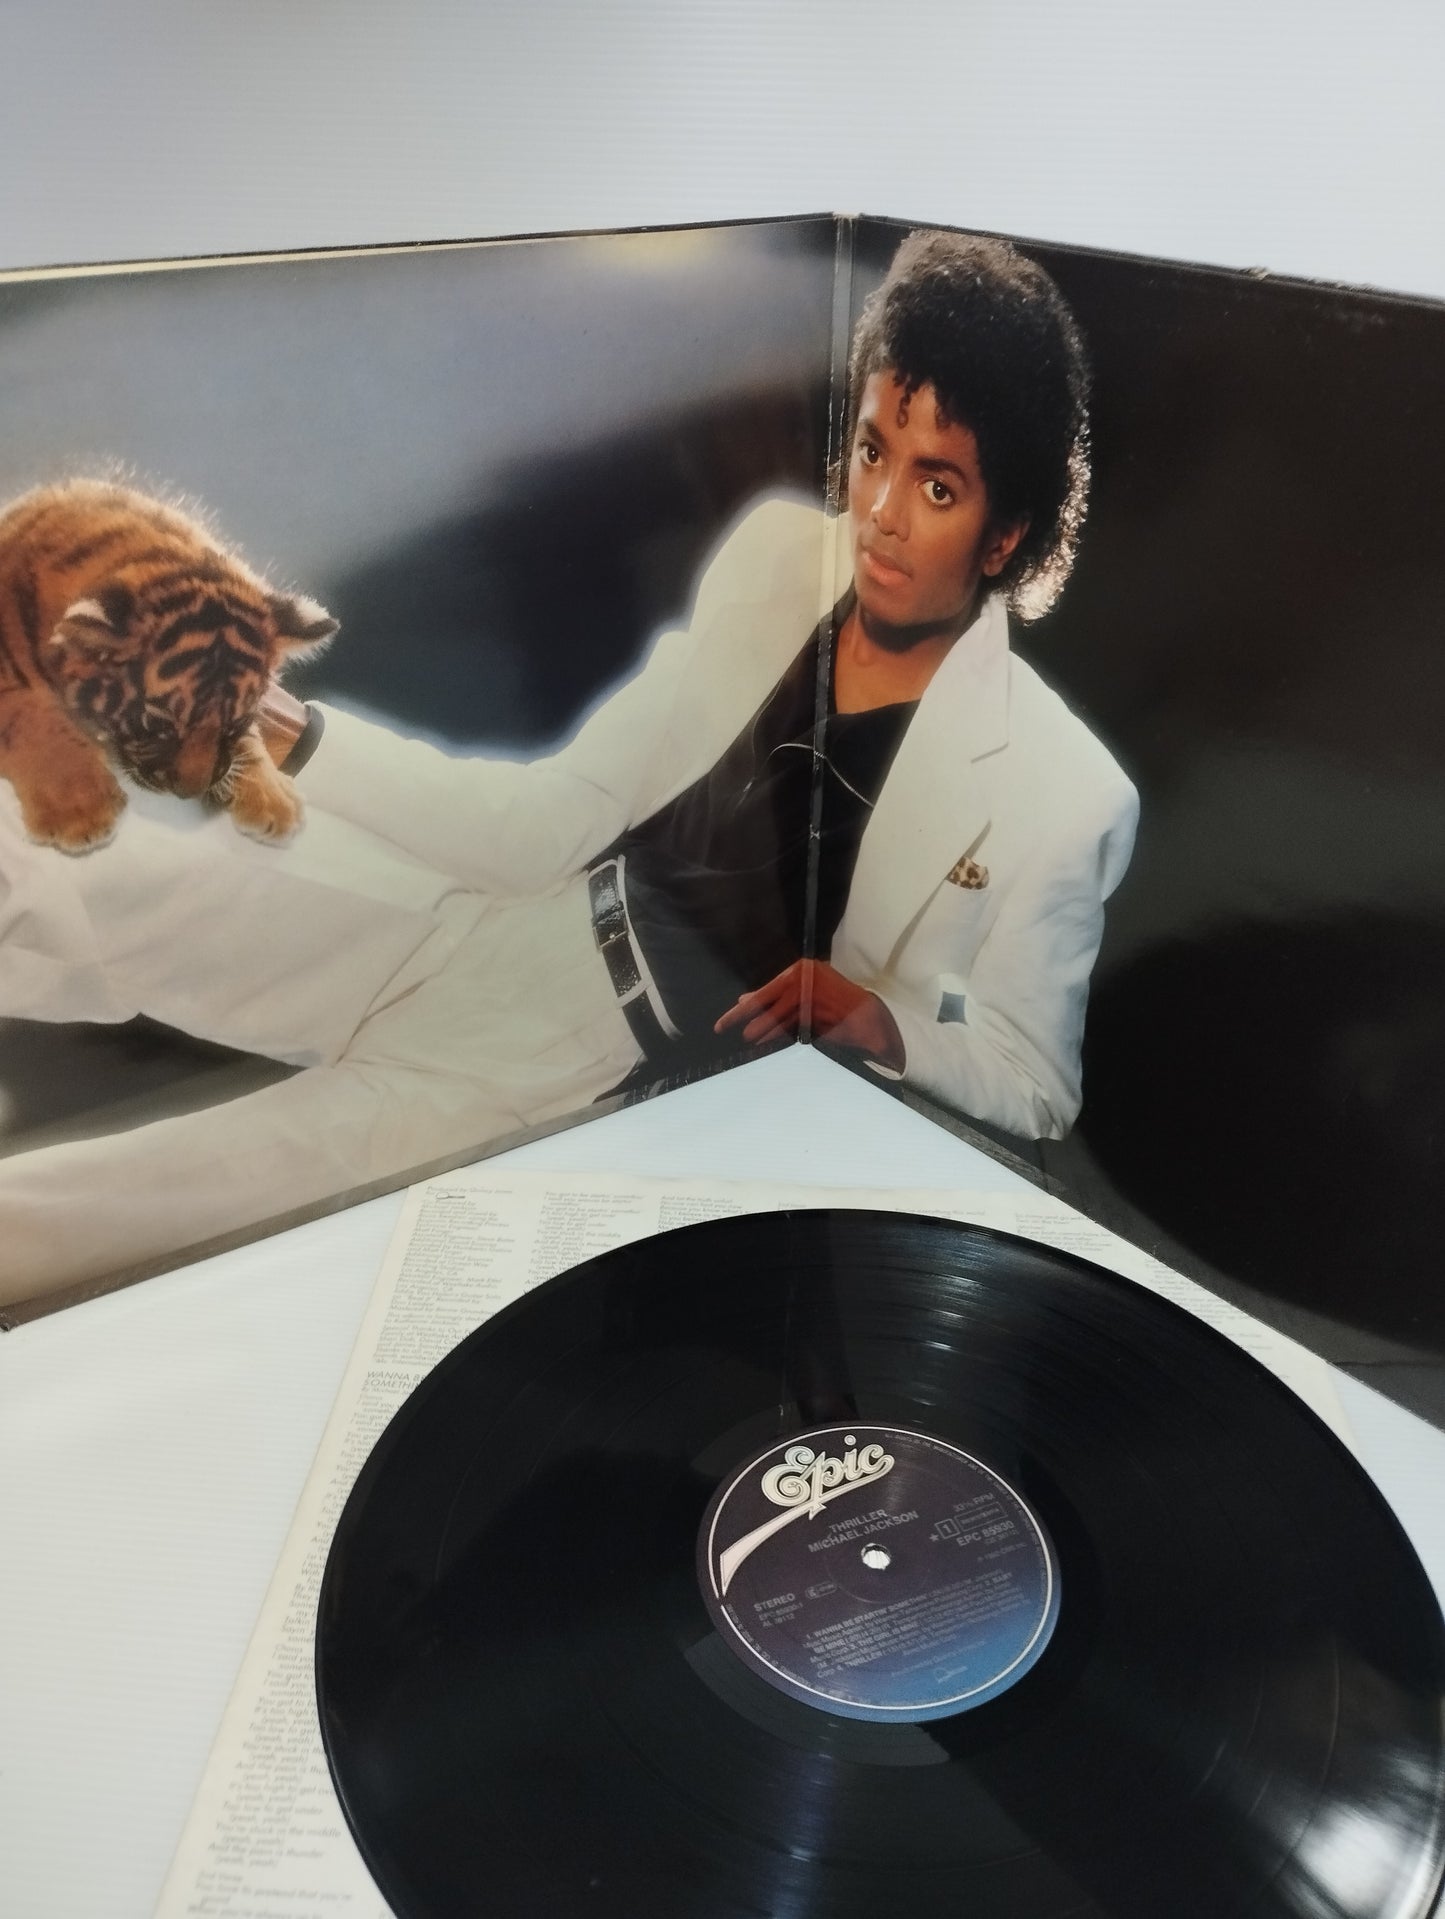 Thriller Michael Jackson LP 33 rpm

 Published in 1982 by Epic code 85930